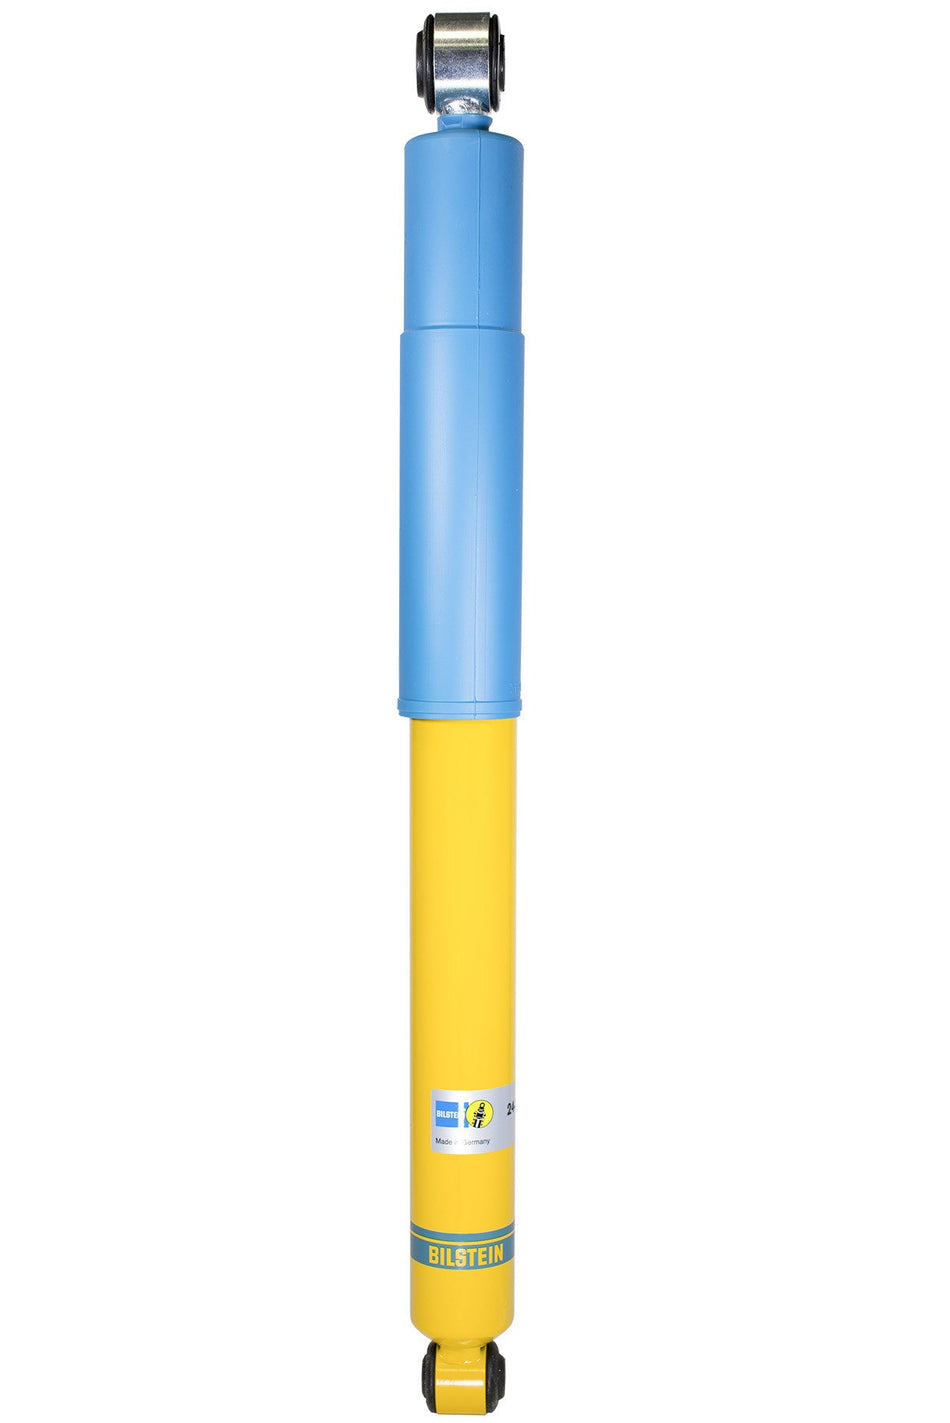 Bilstein Front B6 Shock for Land Rover 90/110 (1984-2001) / Discovery 1 (1989-1995) / Range Rover (1969-1994) (Heavy Duty)